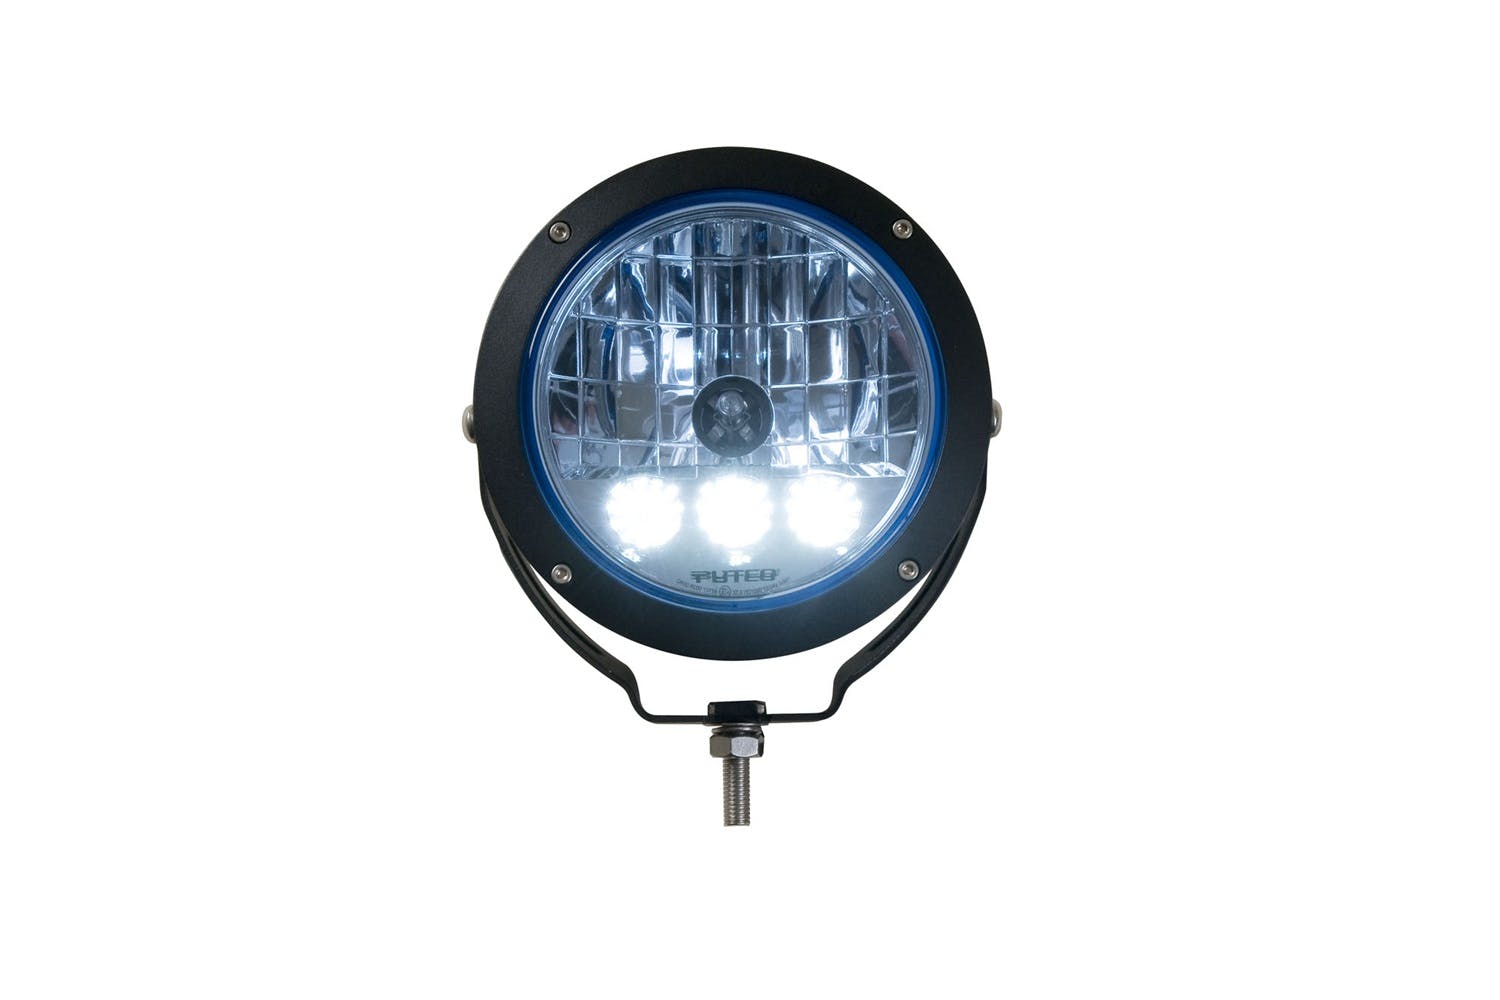 Putco 231920 HID Lamp w/3 LED Daytime Running Lights - 6 inch Black Housing with Blue Tinted Lens